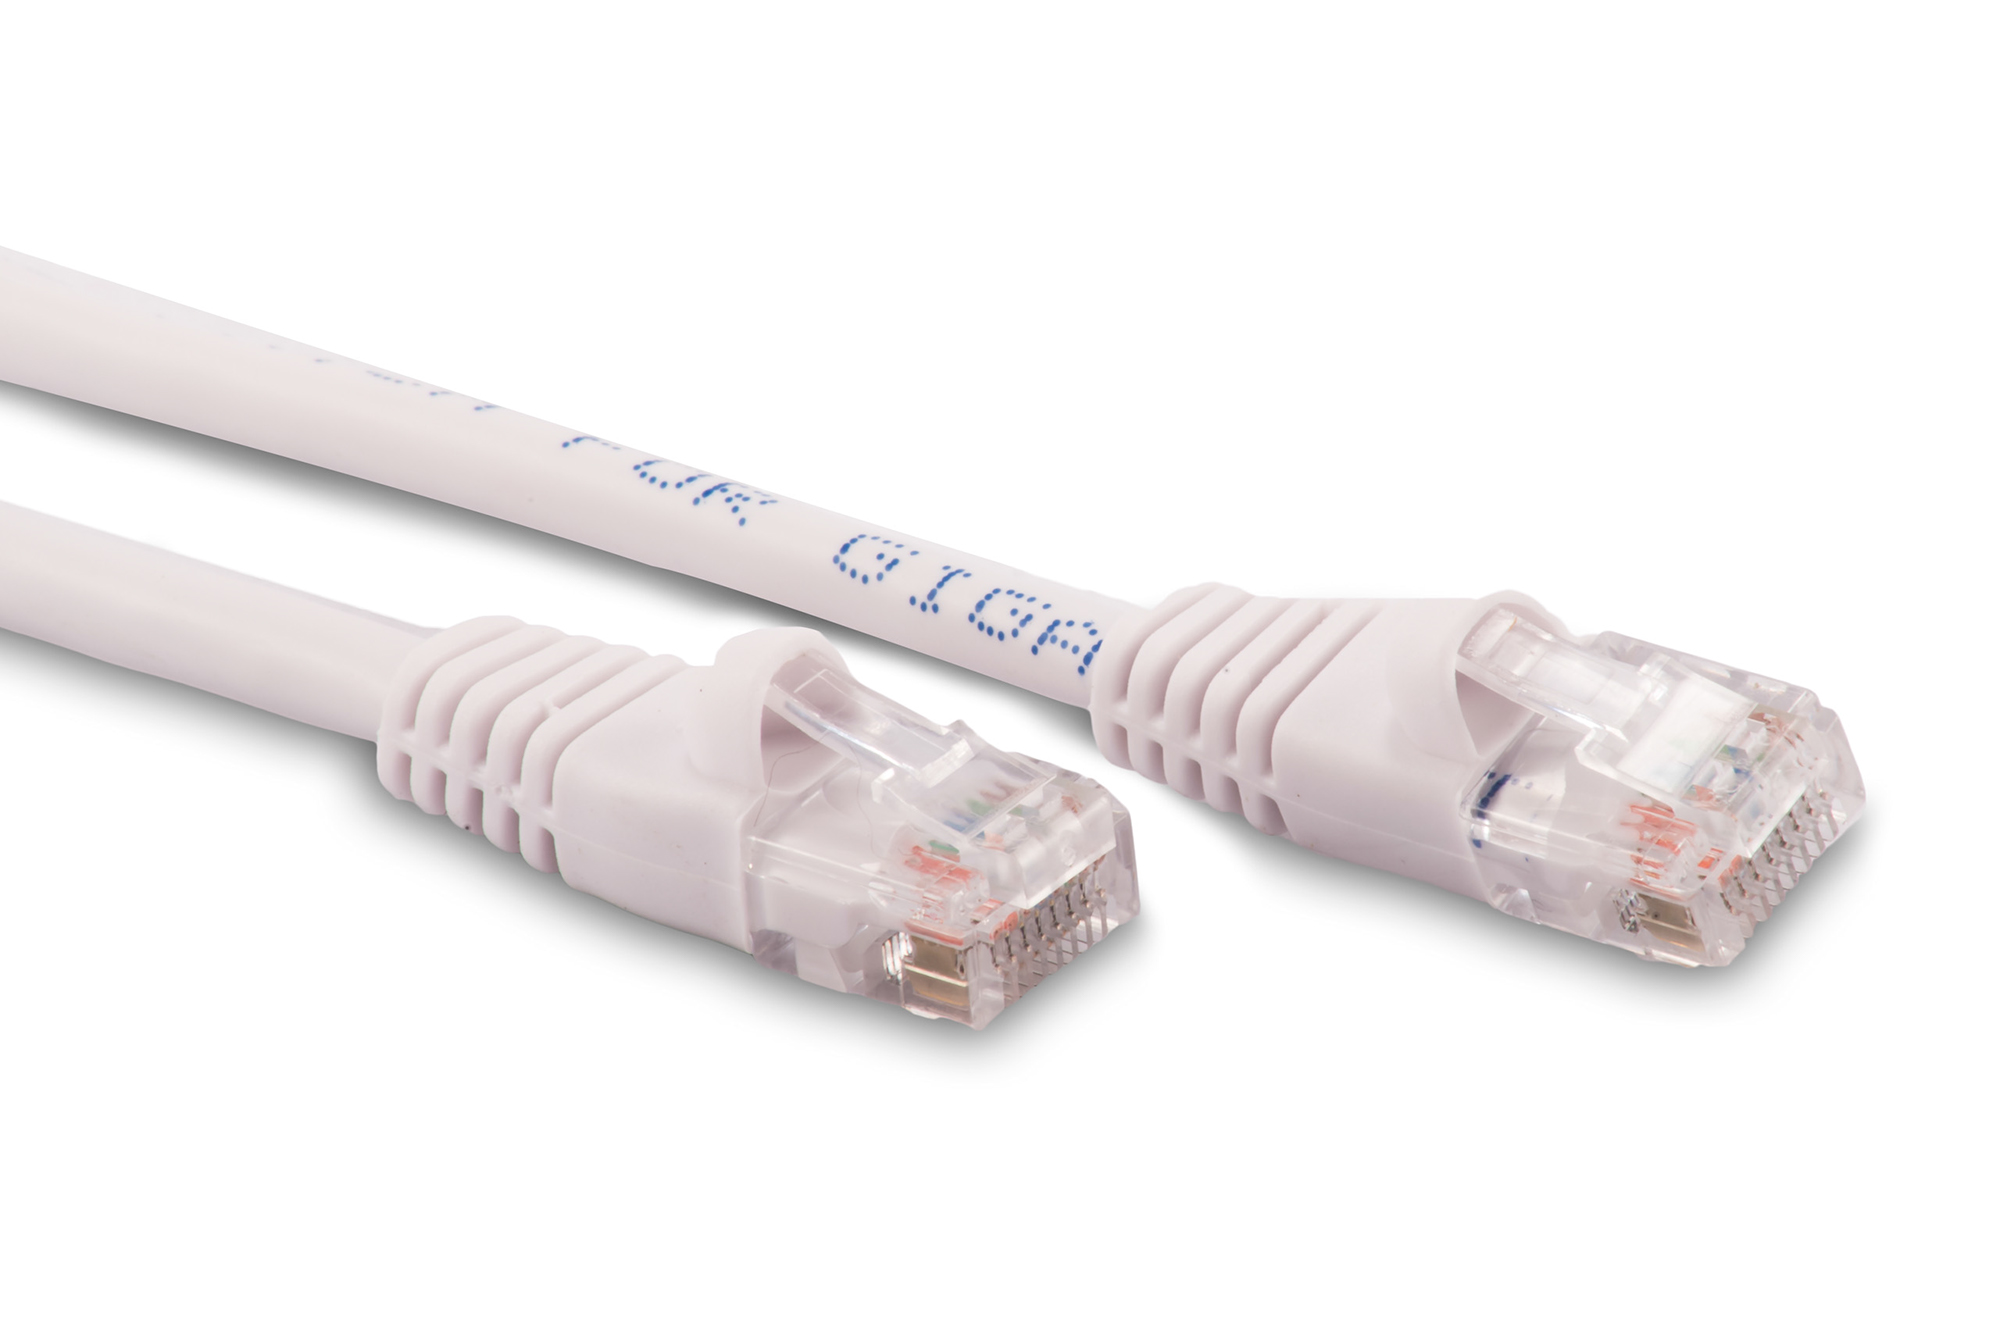 40ft Cat6 Ethernet Patch Cable - White Color - Snagless Boot